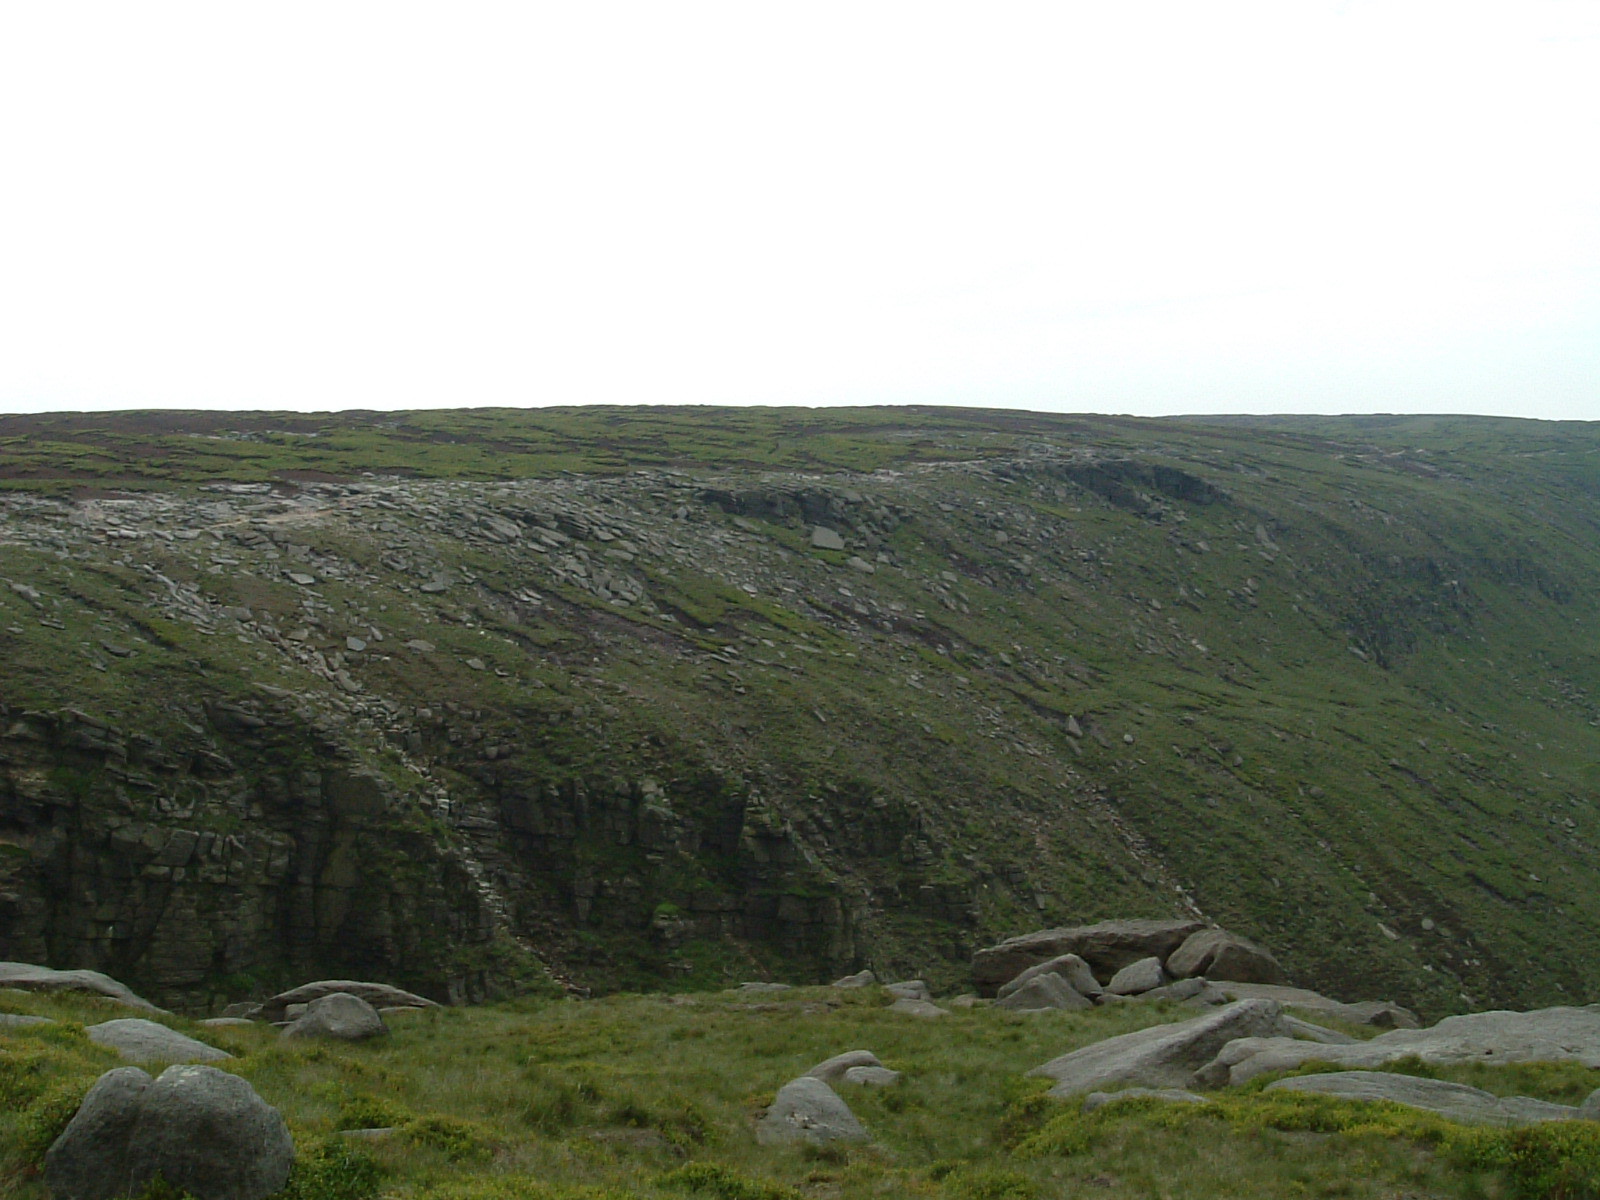 The eastern flank of Kinder Scout